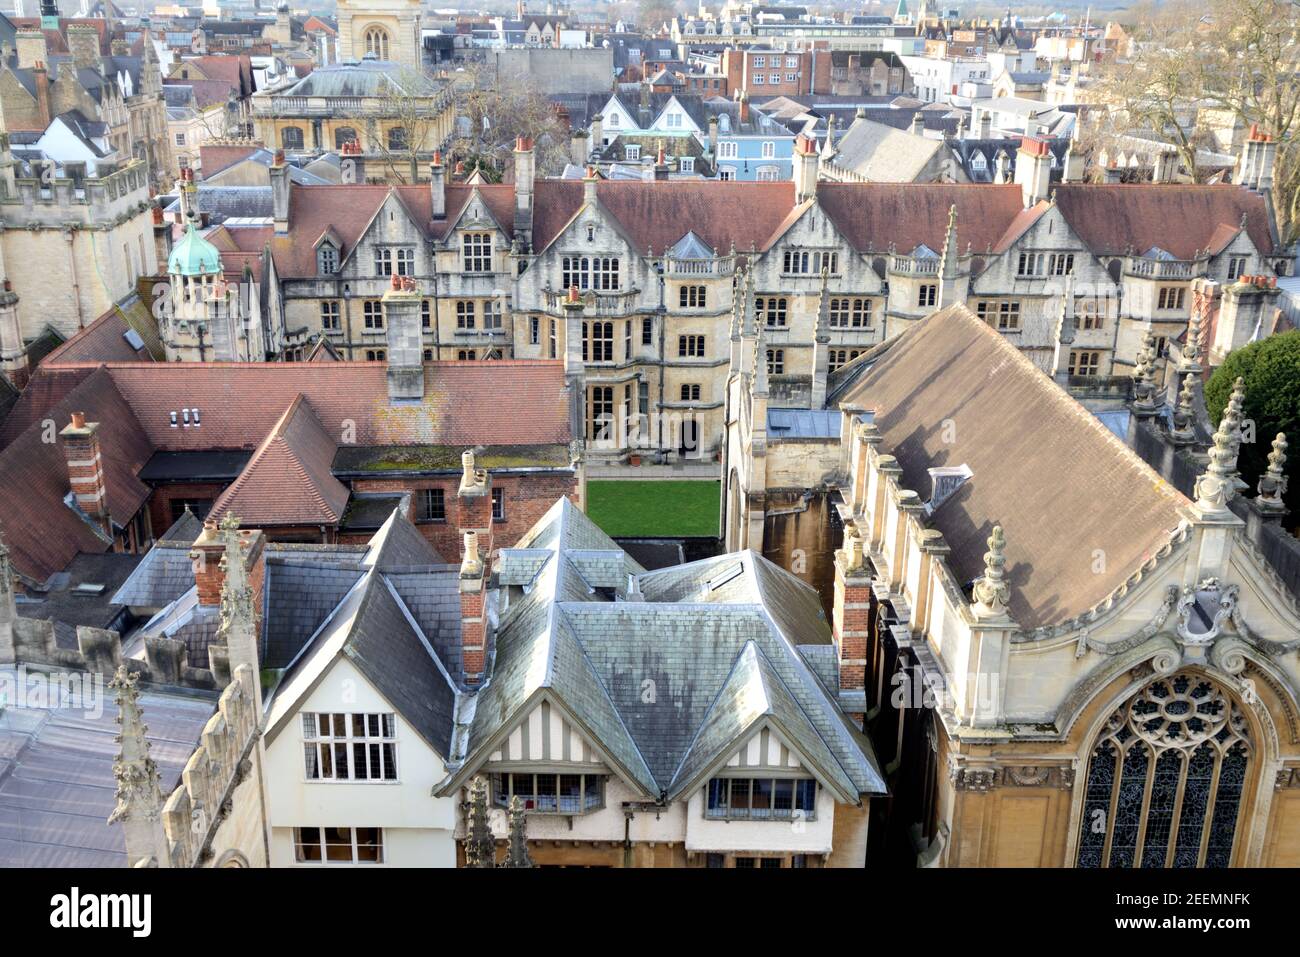 Aerial View or High Angle View over Rooftops of Oxford Old Town & Brasenose College, Oxford University, Oxfordshire England UK Stock Photo